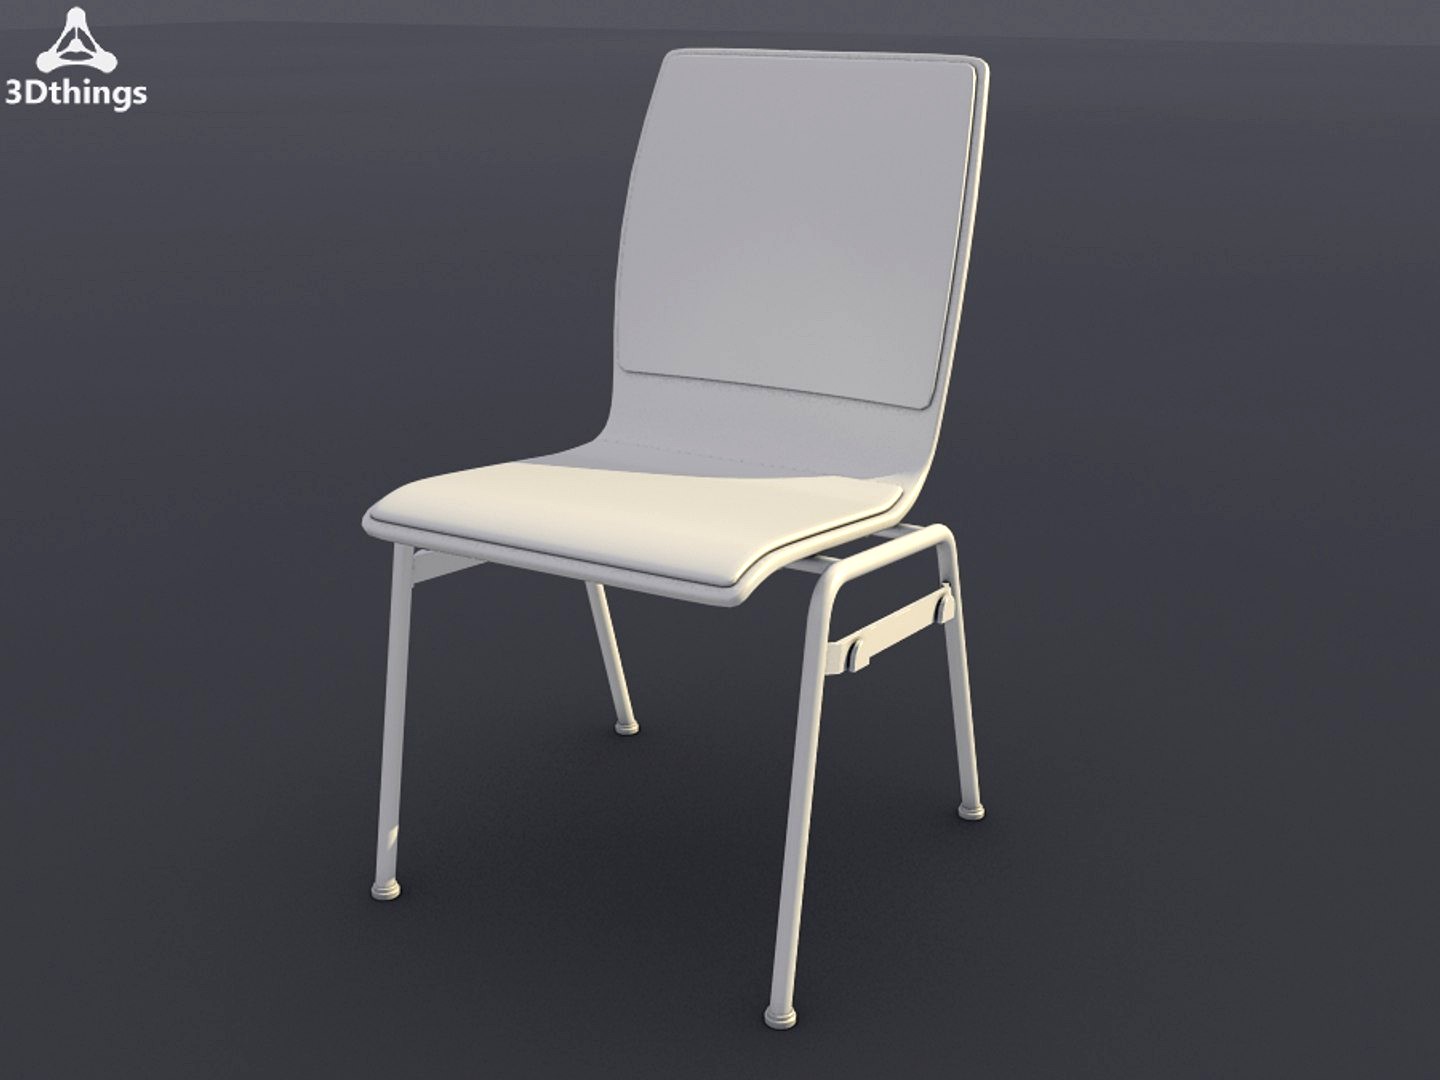 On stage 4-leg model with square-shaped backrest with seat and backrest cushion